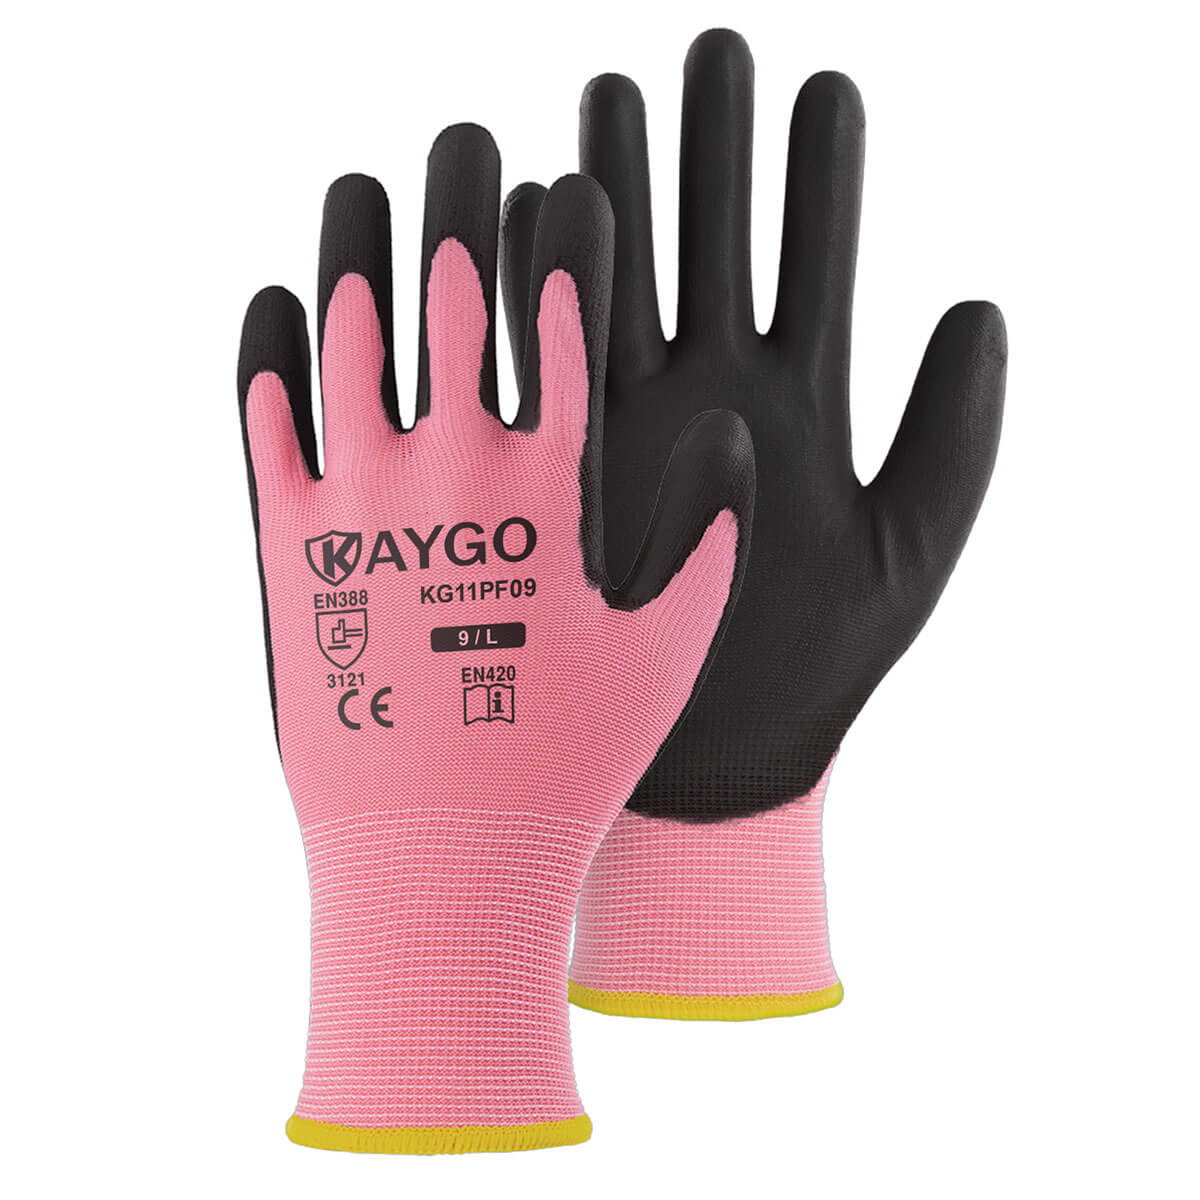 Work Gloves for Men and Women 12 Pairs, KAYGO Kg11p, Seamless Knit Working Glove with Polyurethane Coated for General Purpose, Adult Unisex, Size